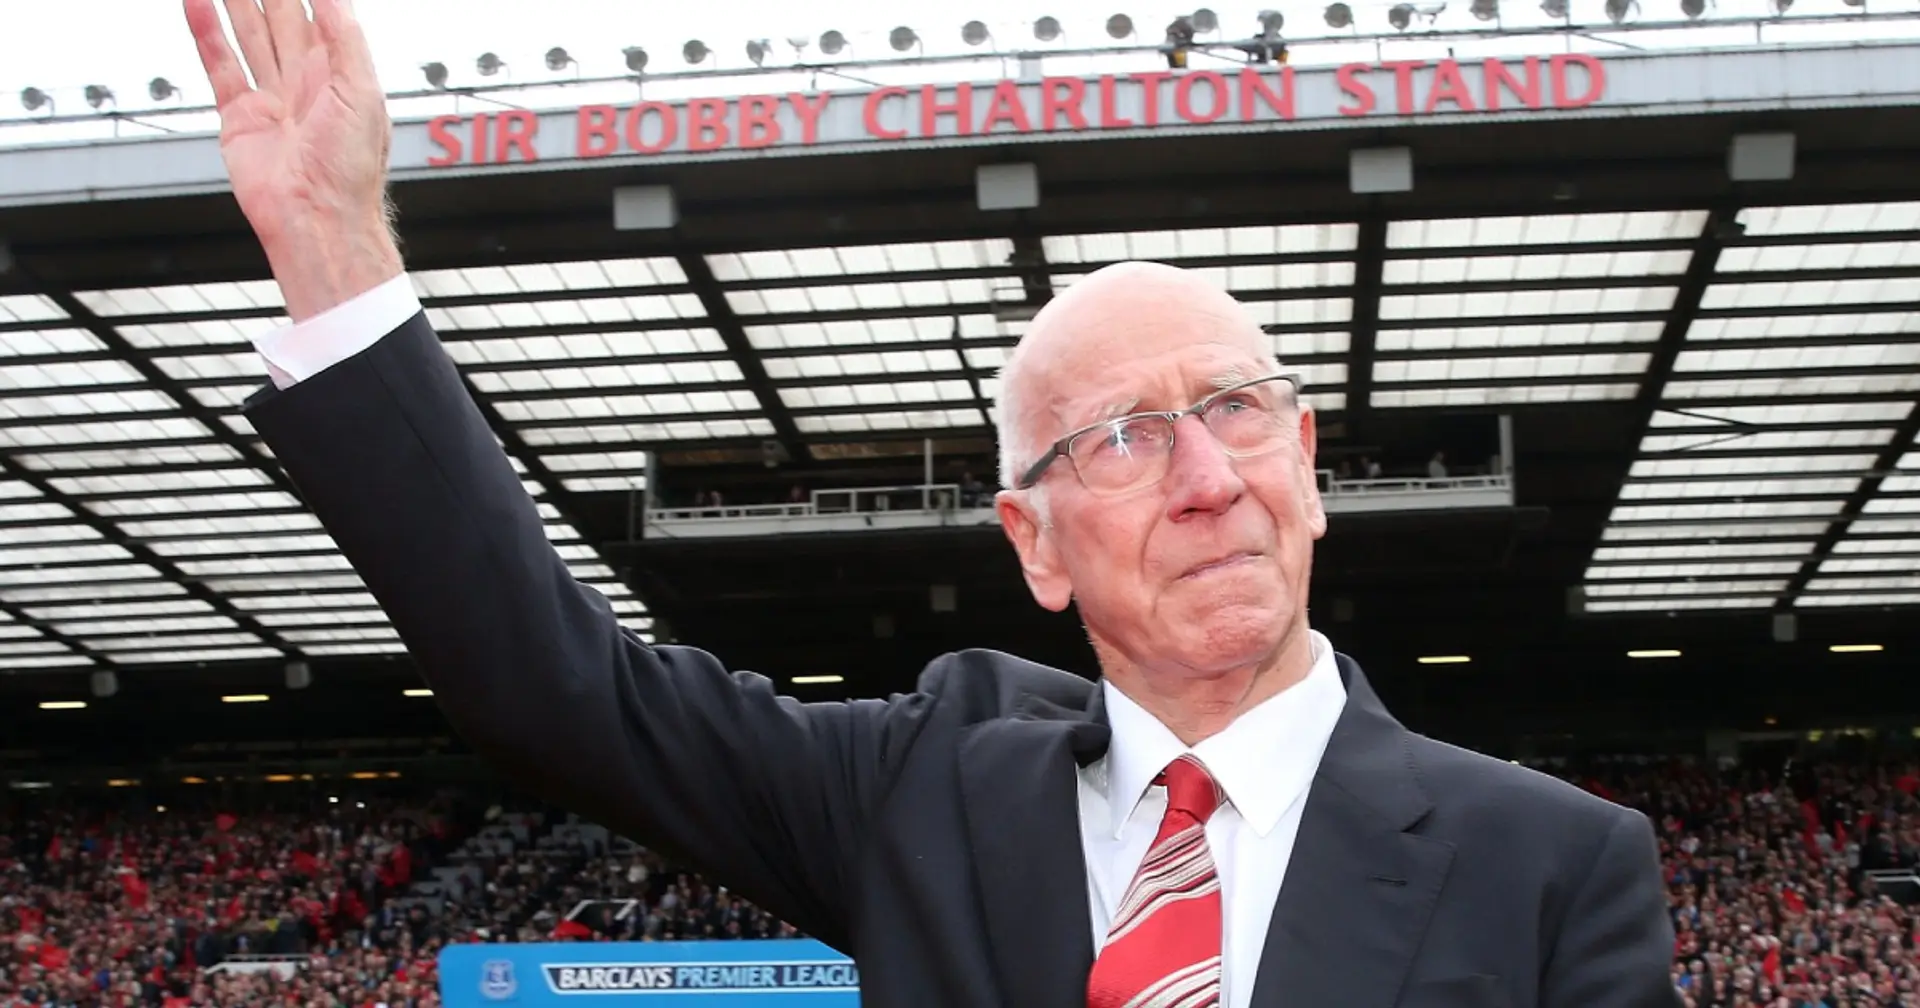 'A champion on and off the pitch': Football world reacts to Sir Bobby Charlton's passing